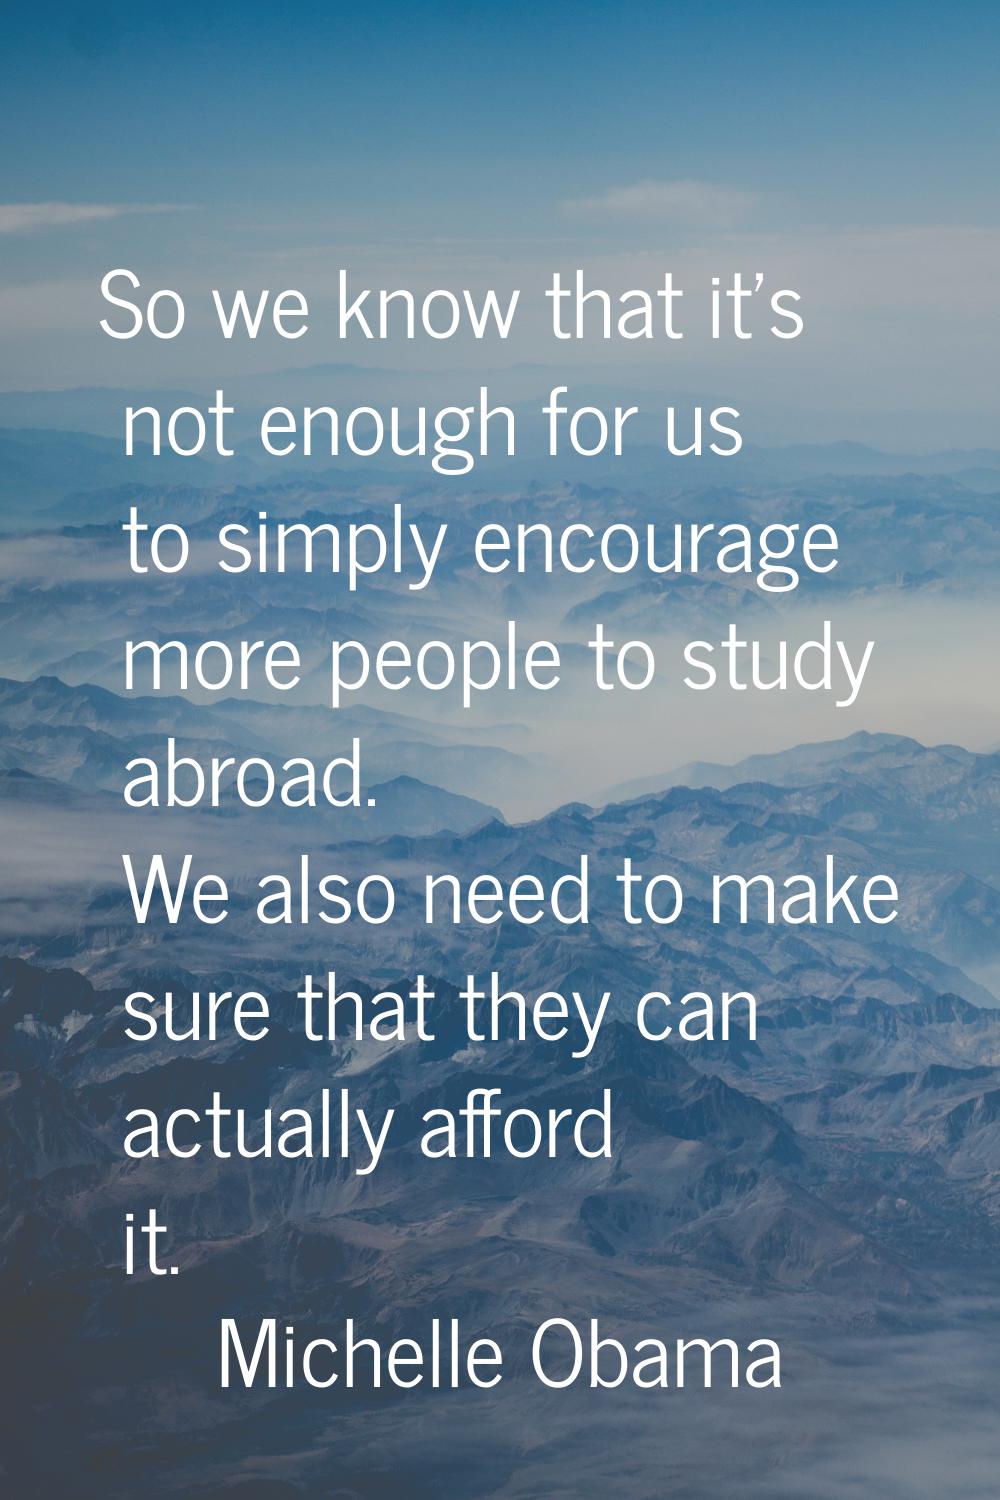 So we know that it's not enough for us to simply encourage more people to study abroad. We also nee